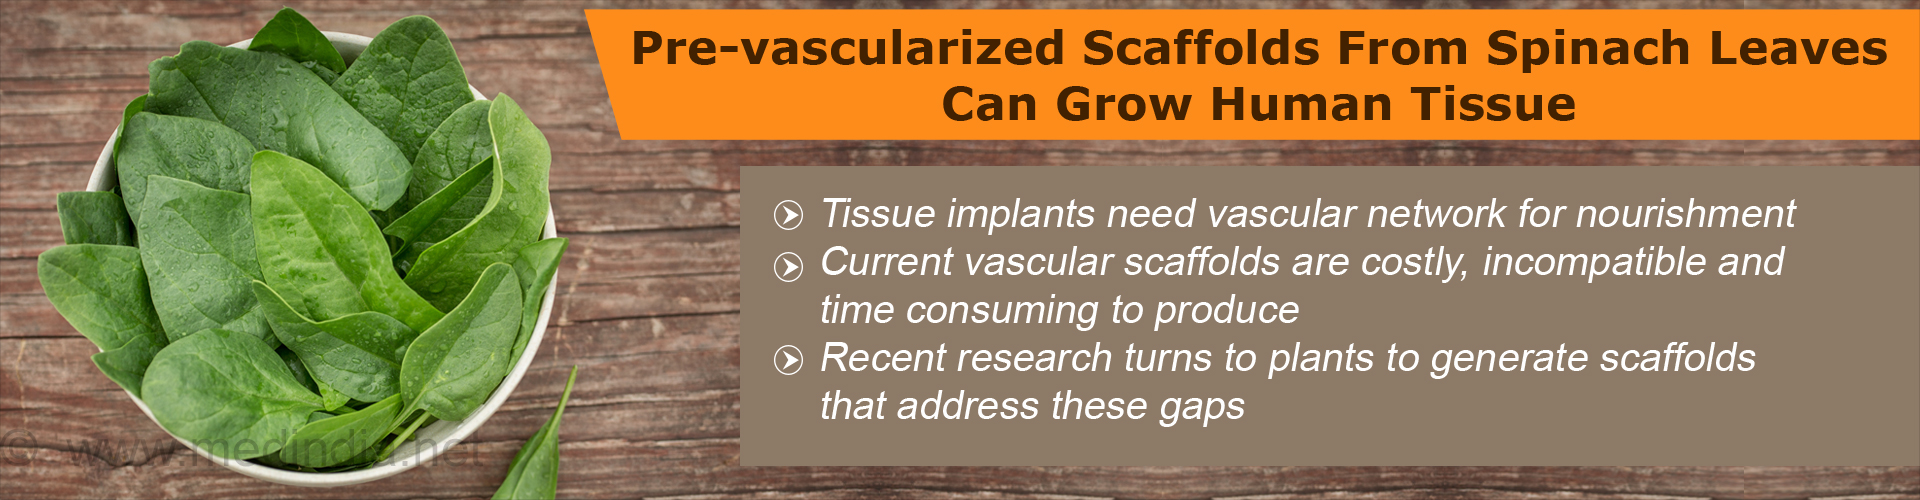 Pre-vascularized scaffolds from spinach leaves can grow human tissue
- Tissue implants need vascular network for nourishment
- Current vascular scaffolds are costly, incompatible and time consuming to produce
- Recent research turns to plants to generate scaffolds that address these gaps